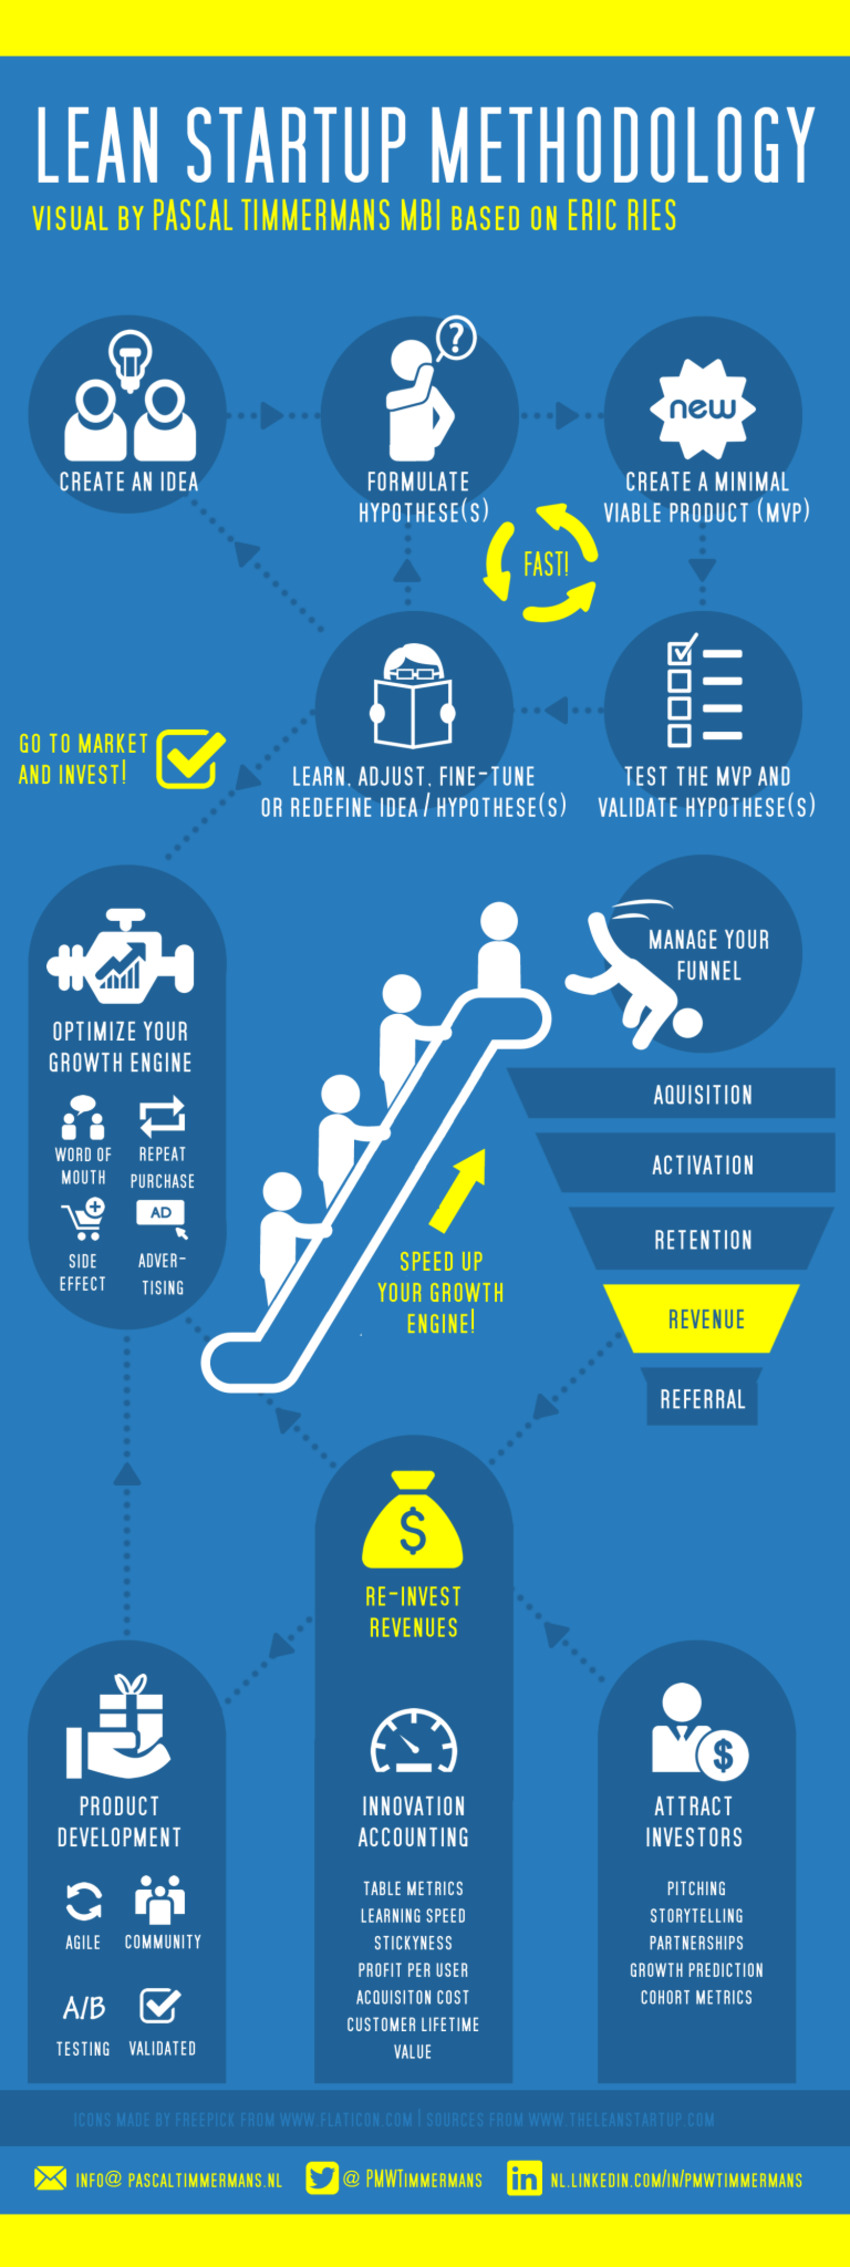 Lean Startup Methodology [infographic] – Innovation Excellence | The MarTech Digest | Scoop.it